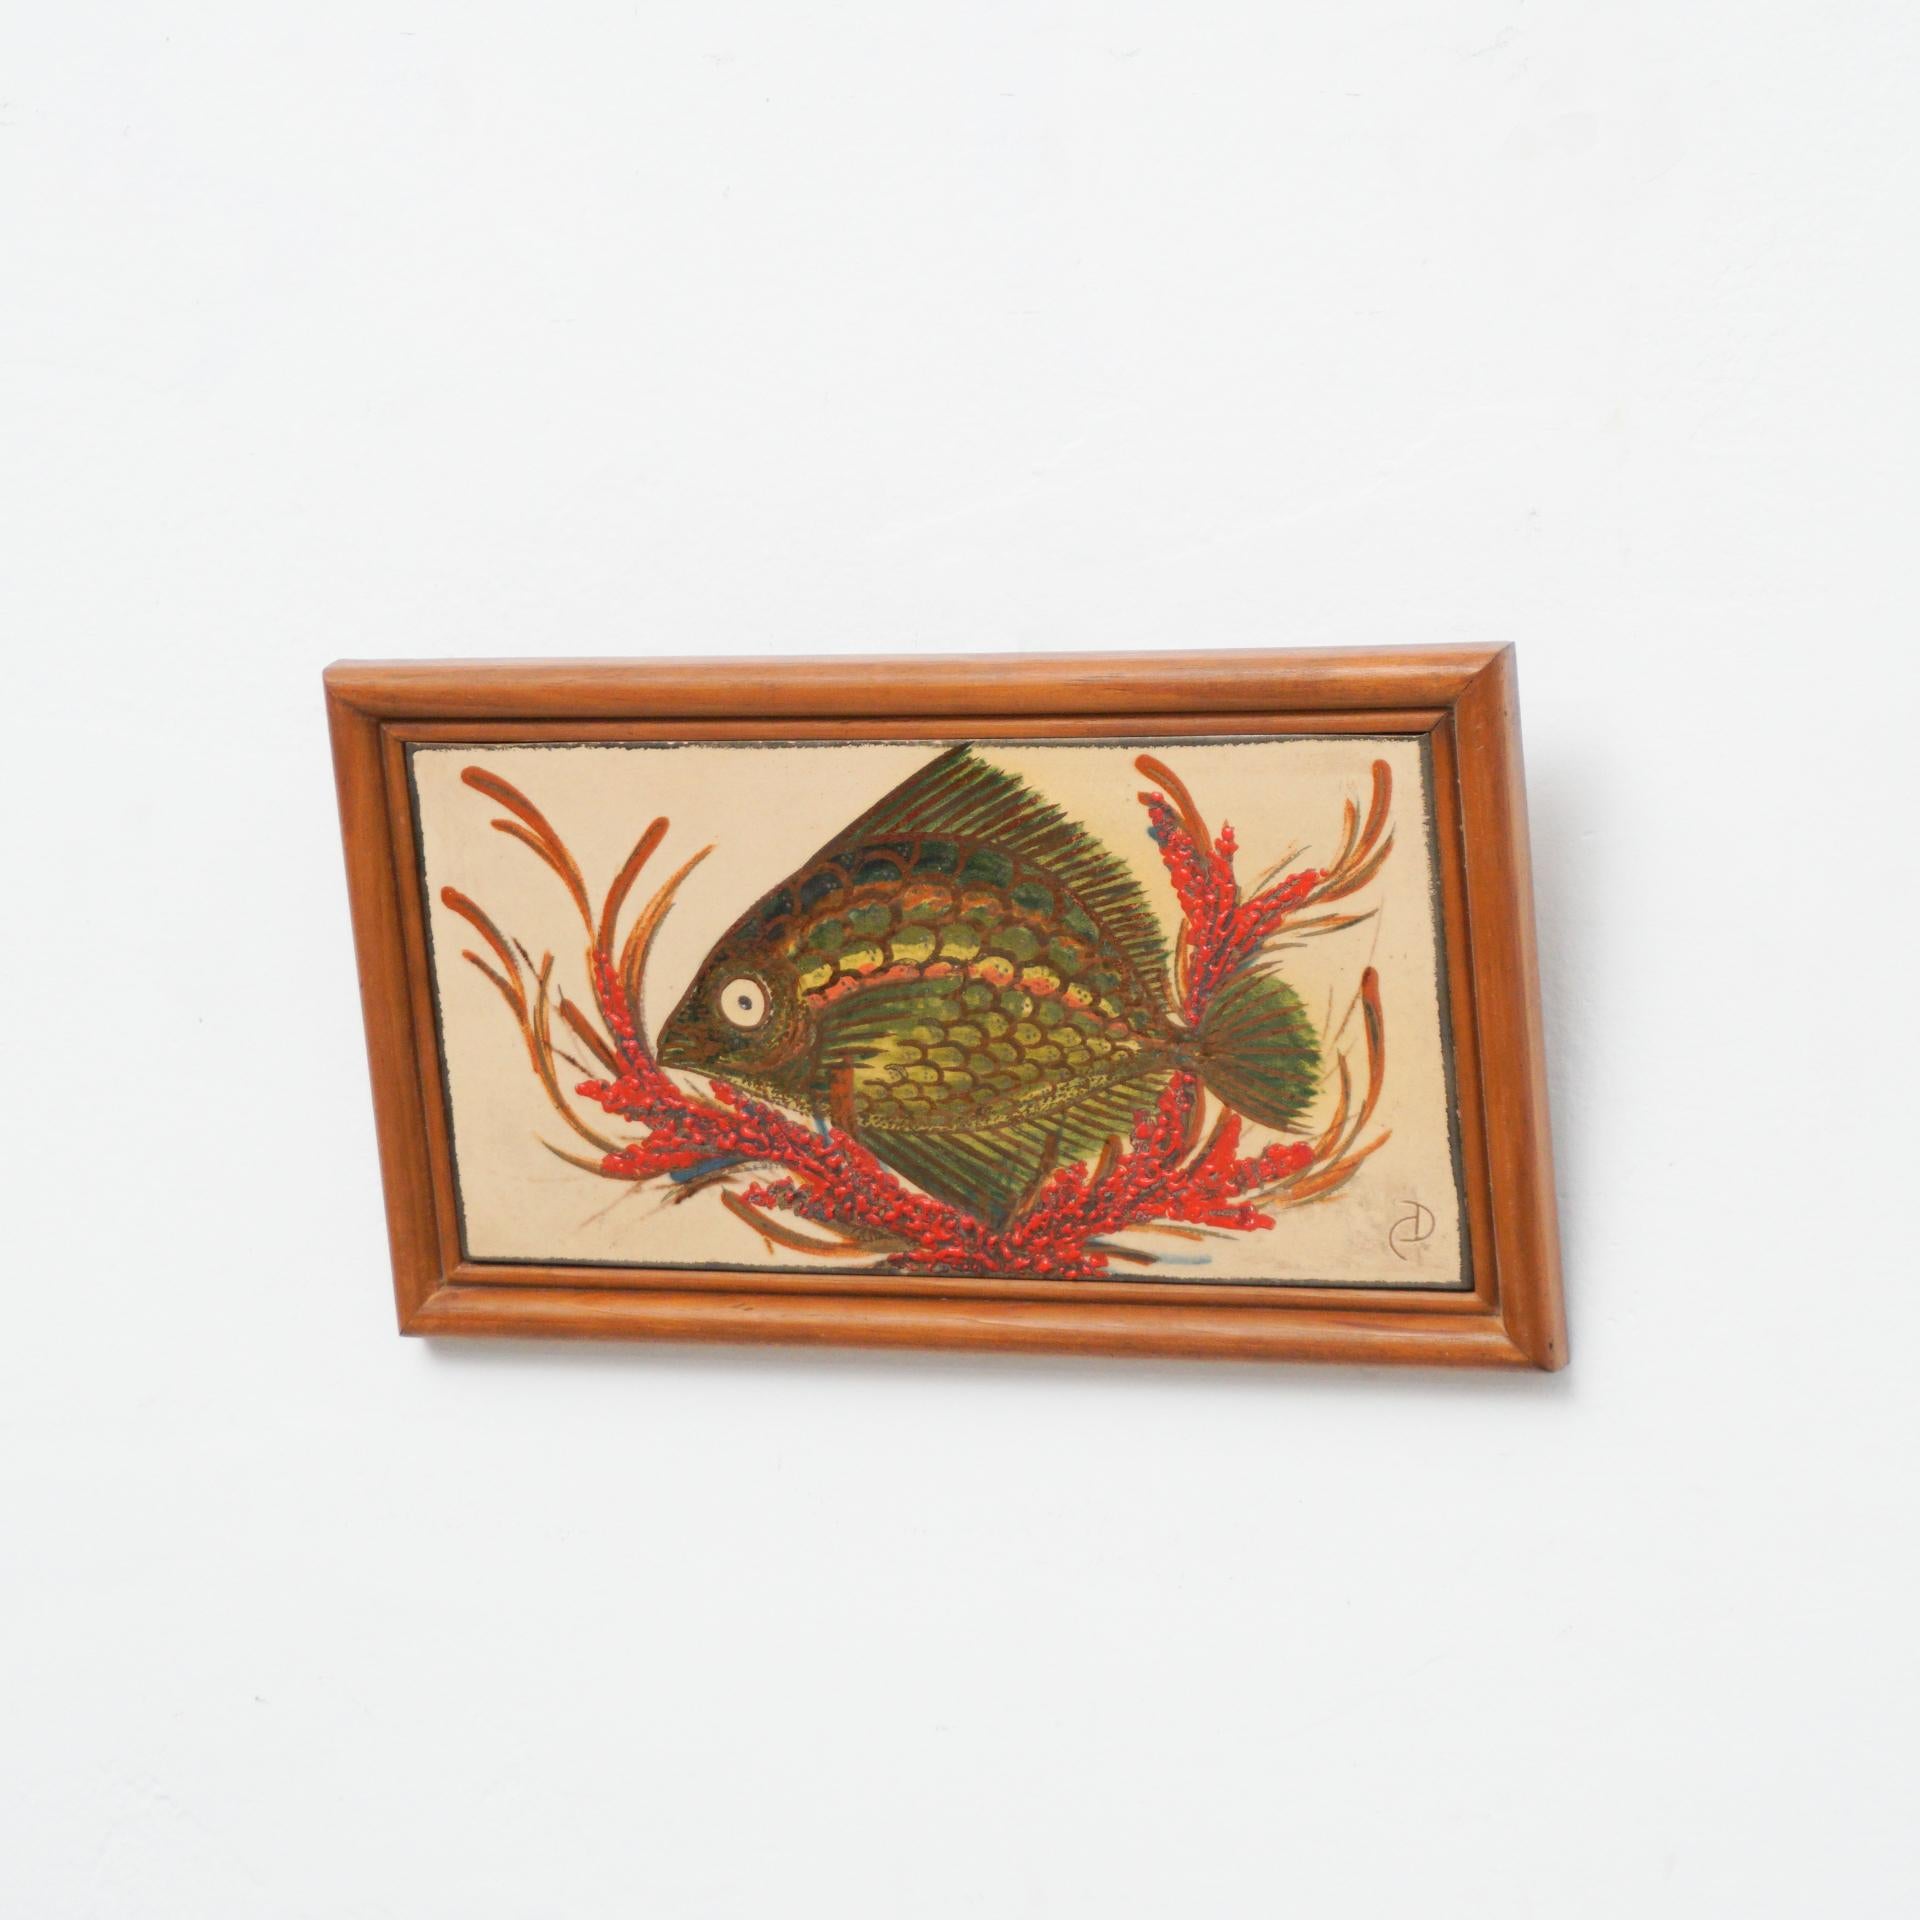 Ceramic Hand Painted Artwork of a fish by Catalan artist Diaz Costa, circa 1960.
Framed. Signed.

In original condition, with minor wear consistent of age and use, preserving a beautiul patina.